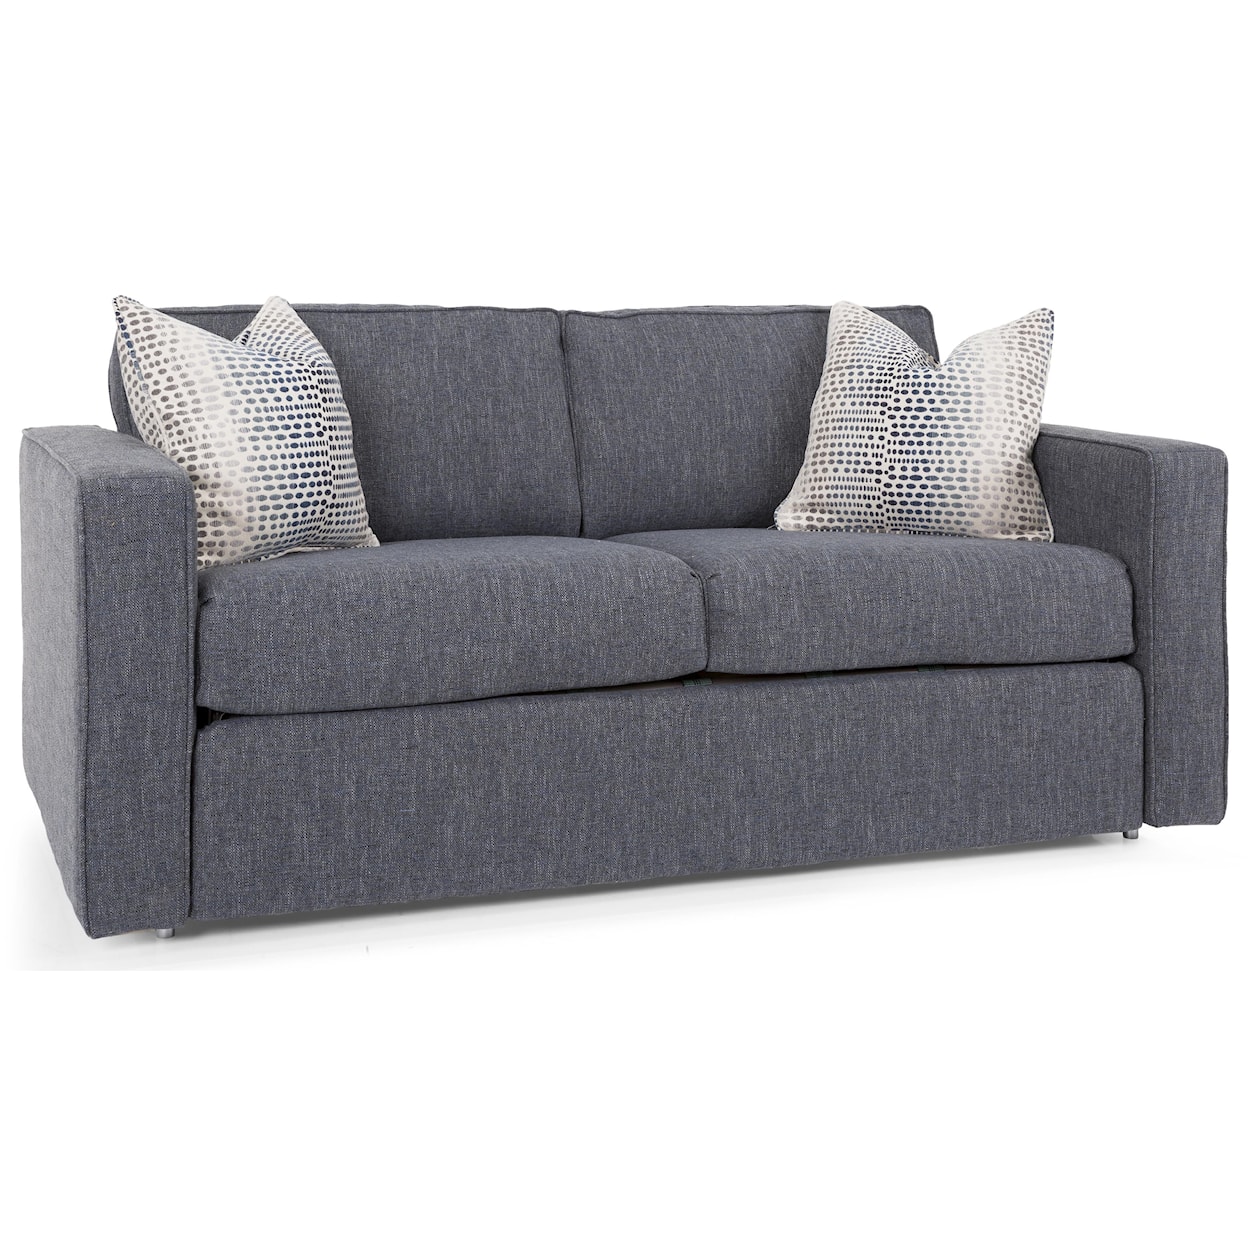 Taelor Designs Calico Double Sofabed